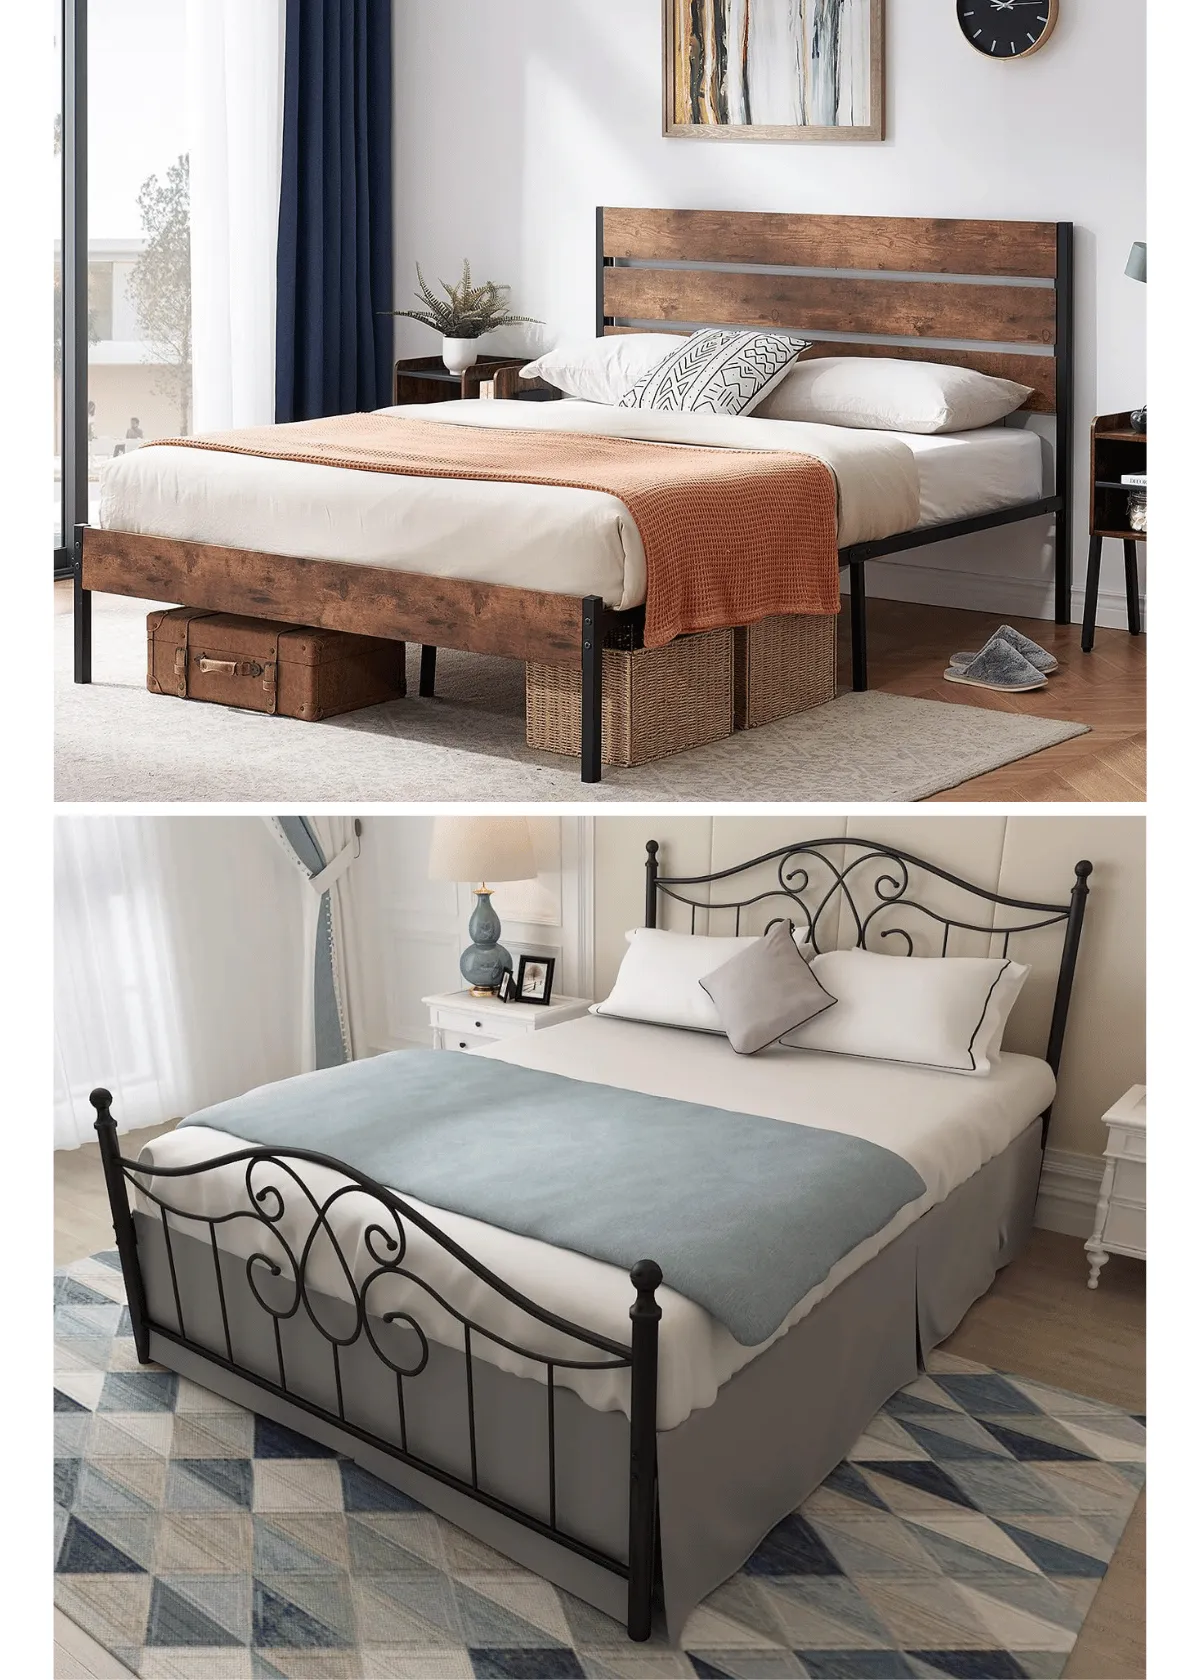 "Are Vintage Bed Frames the Best Classic Style for Your Room?"